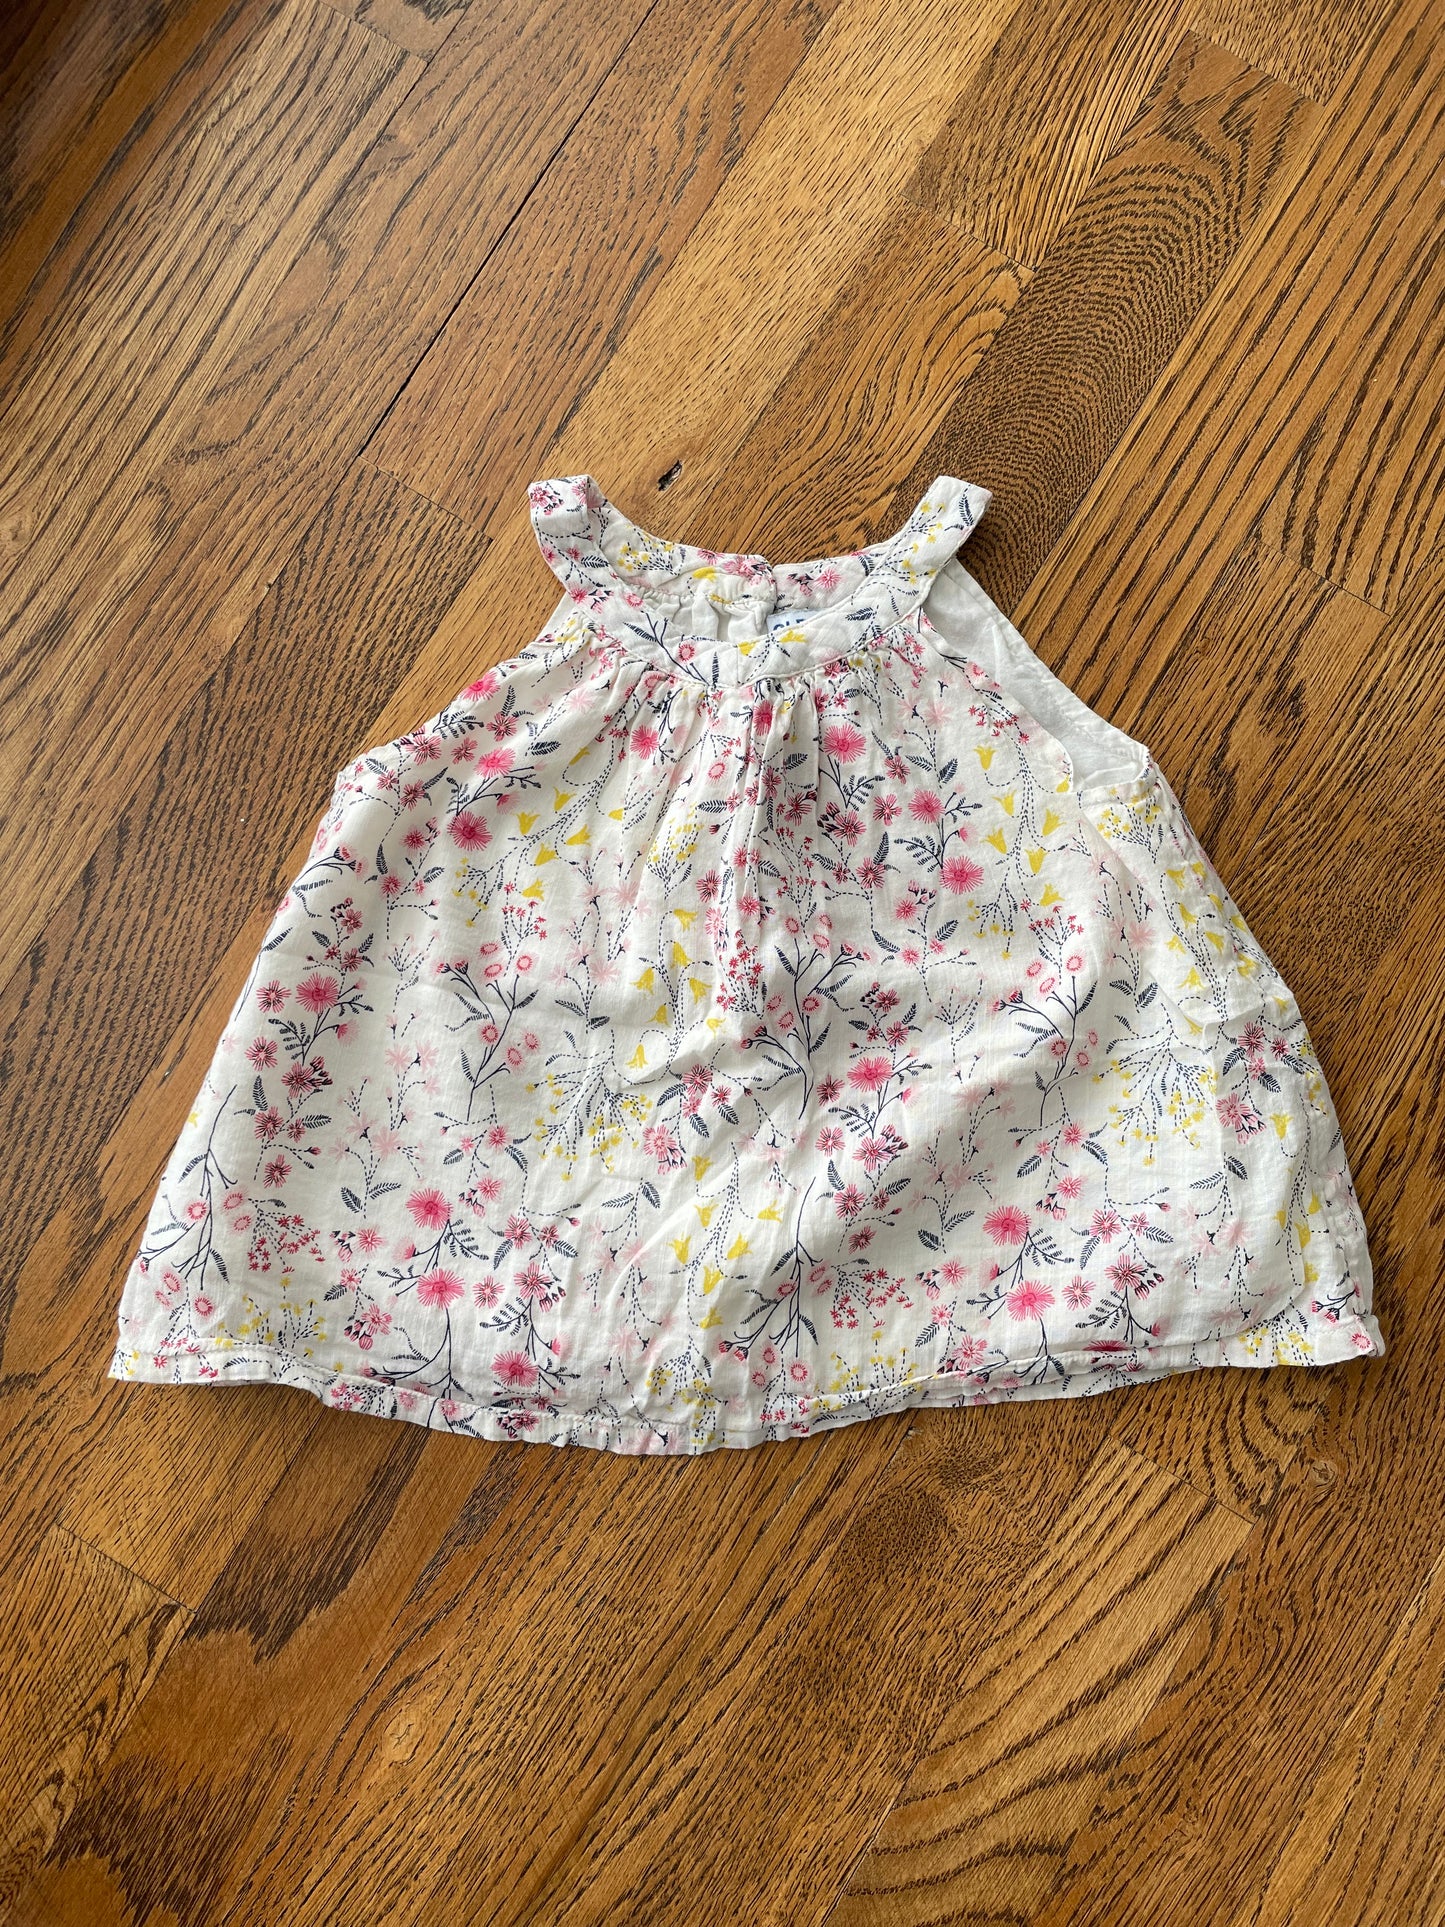 Girls 2T Old Navy Sleeveless Floral Top